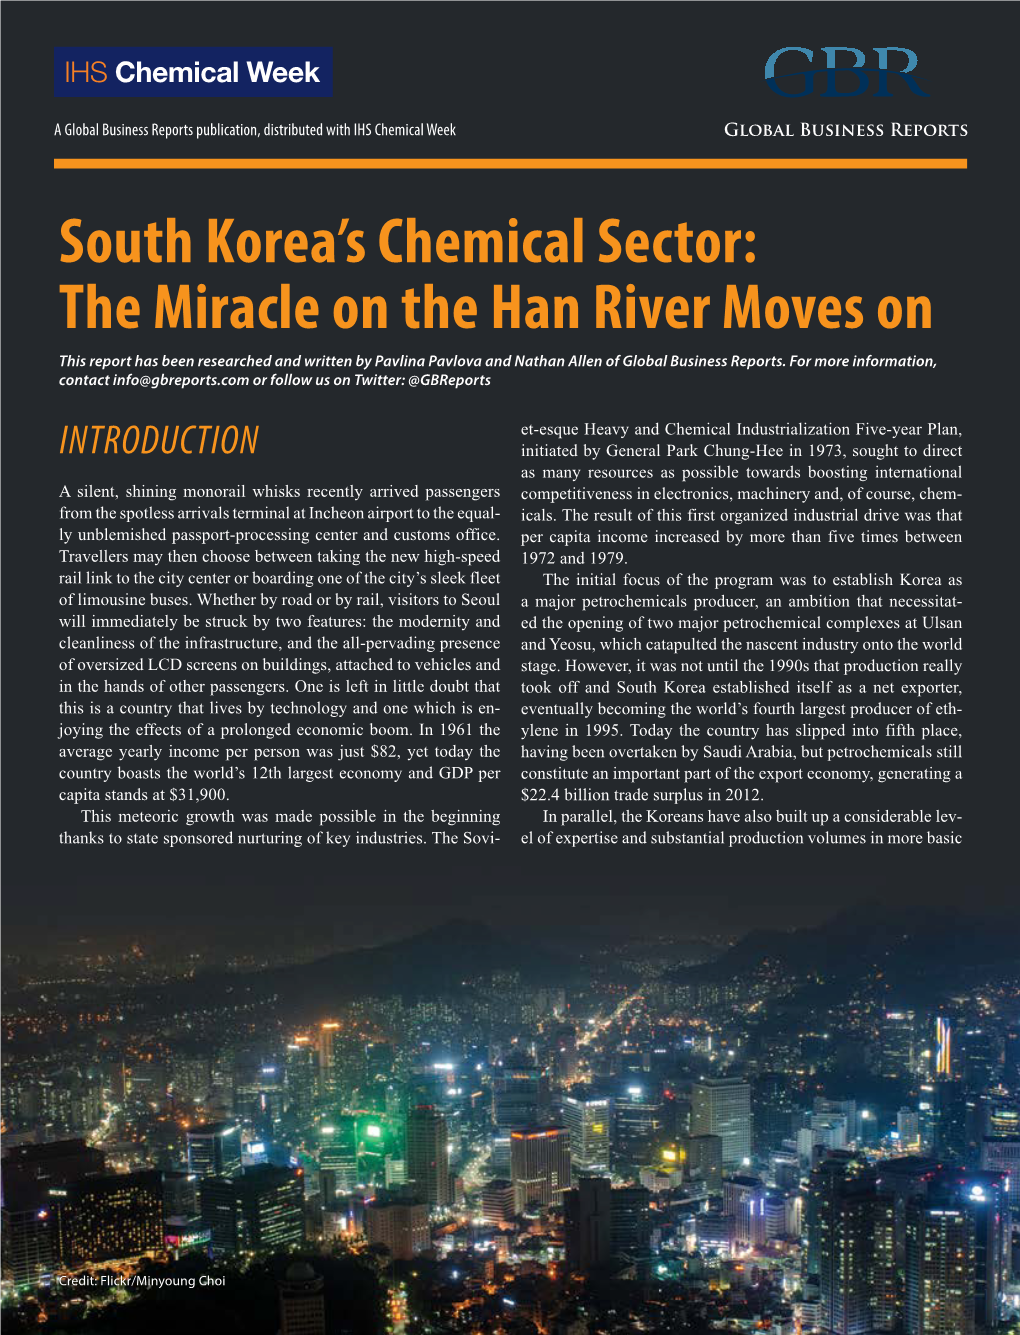 South Korea's Chemical Sector: the Miracle on the Han River Moves On